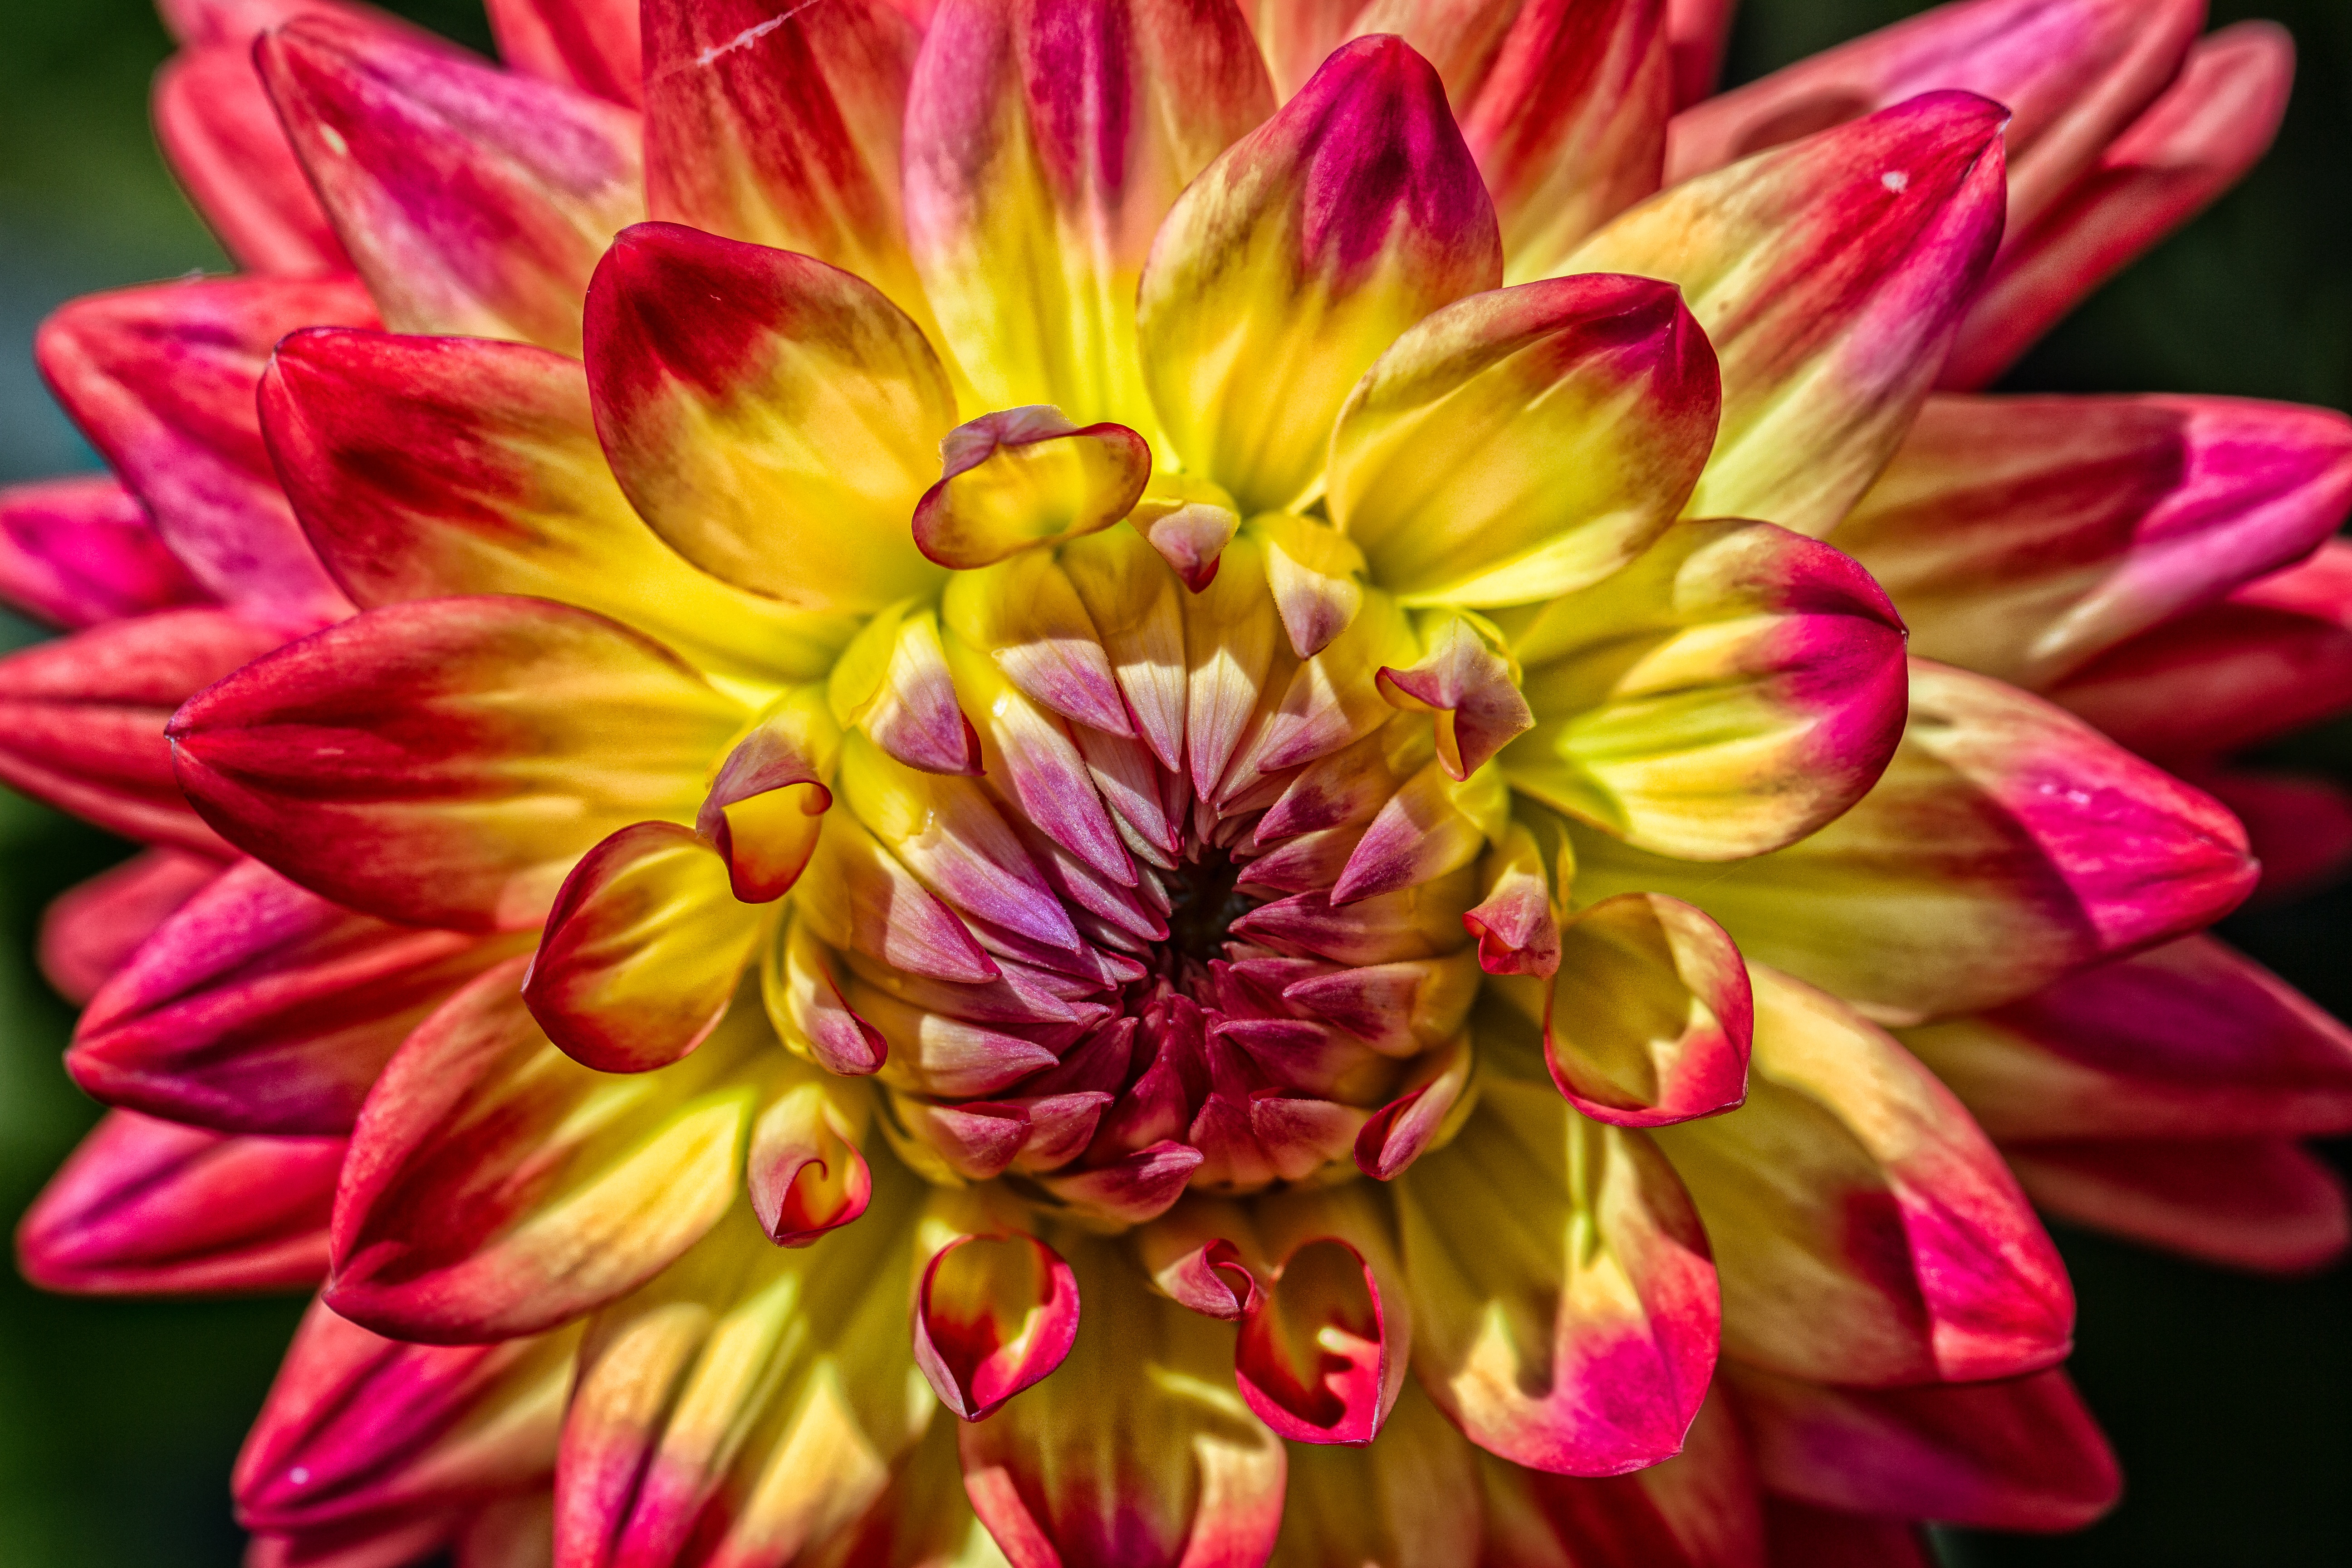 152729 download wallpaper petals, flowers, bud, close-up, dahlia screensavers and pictures for free